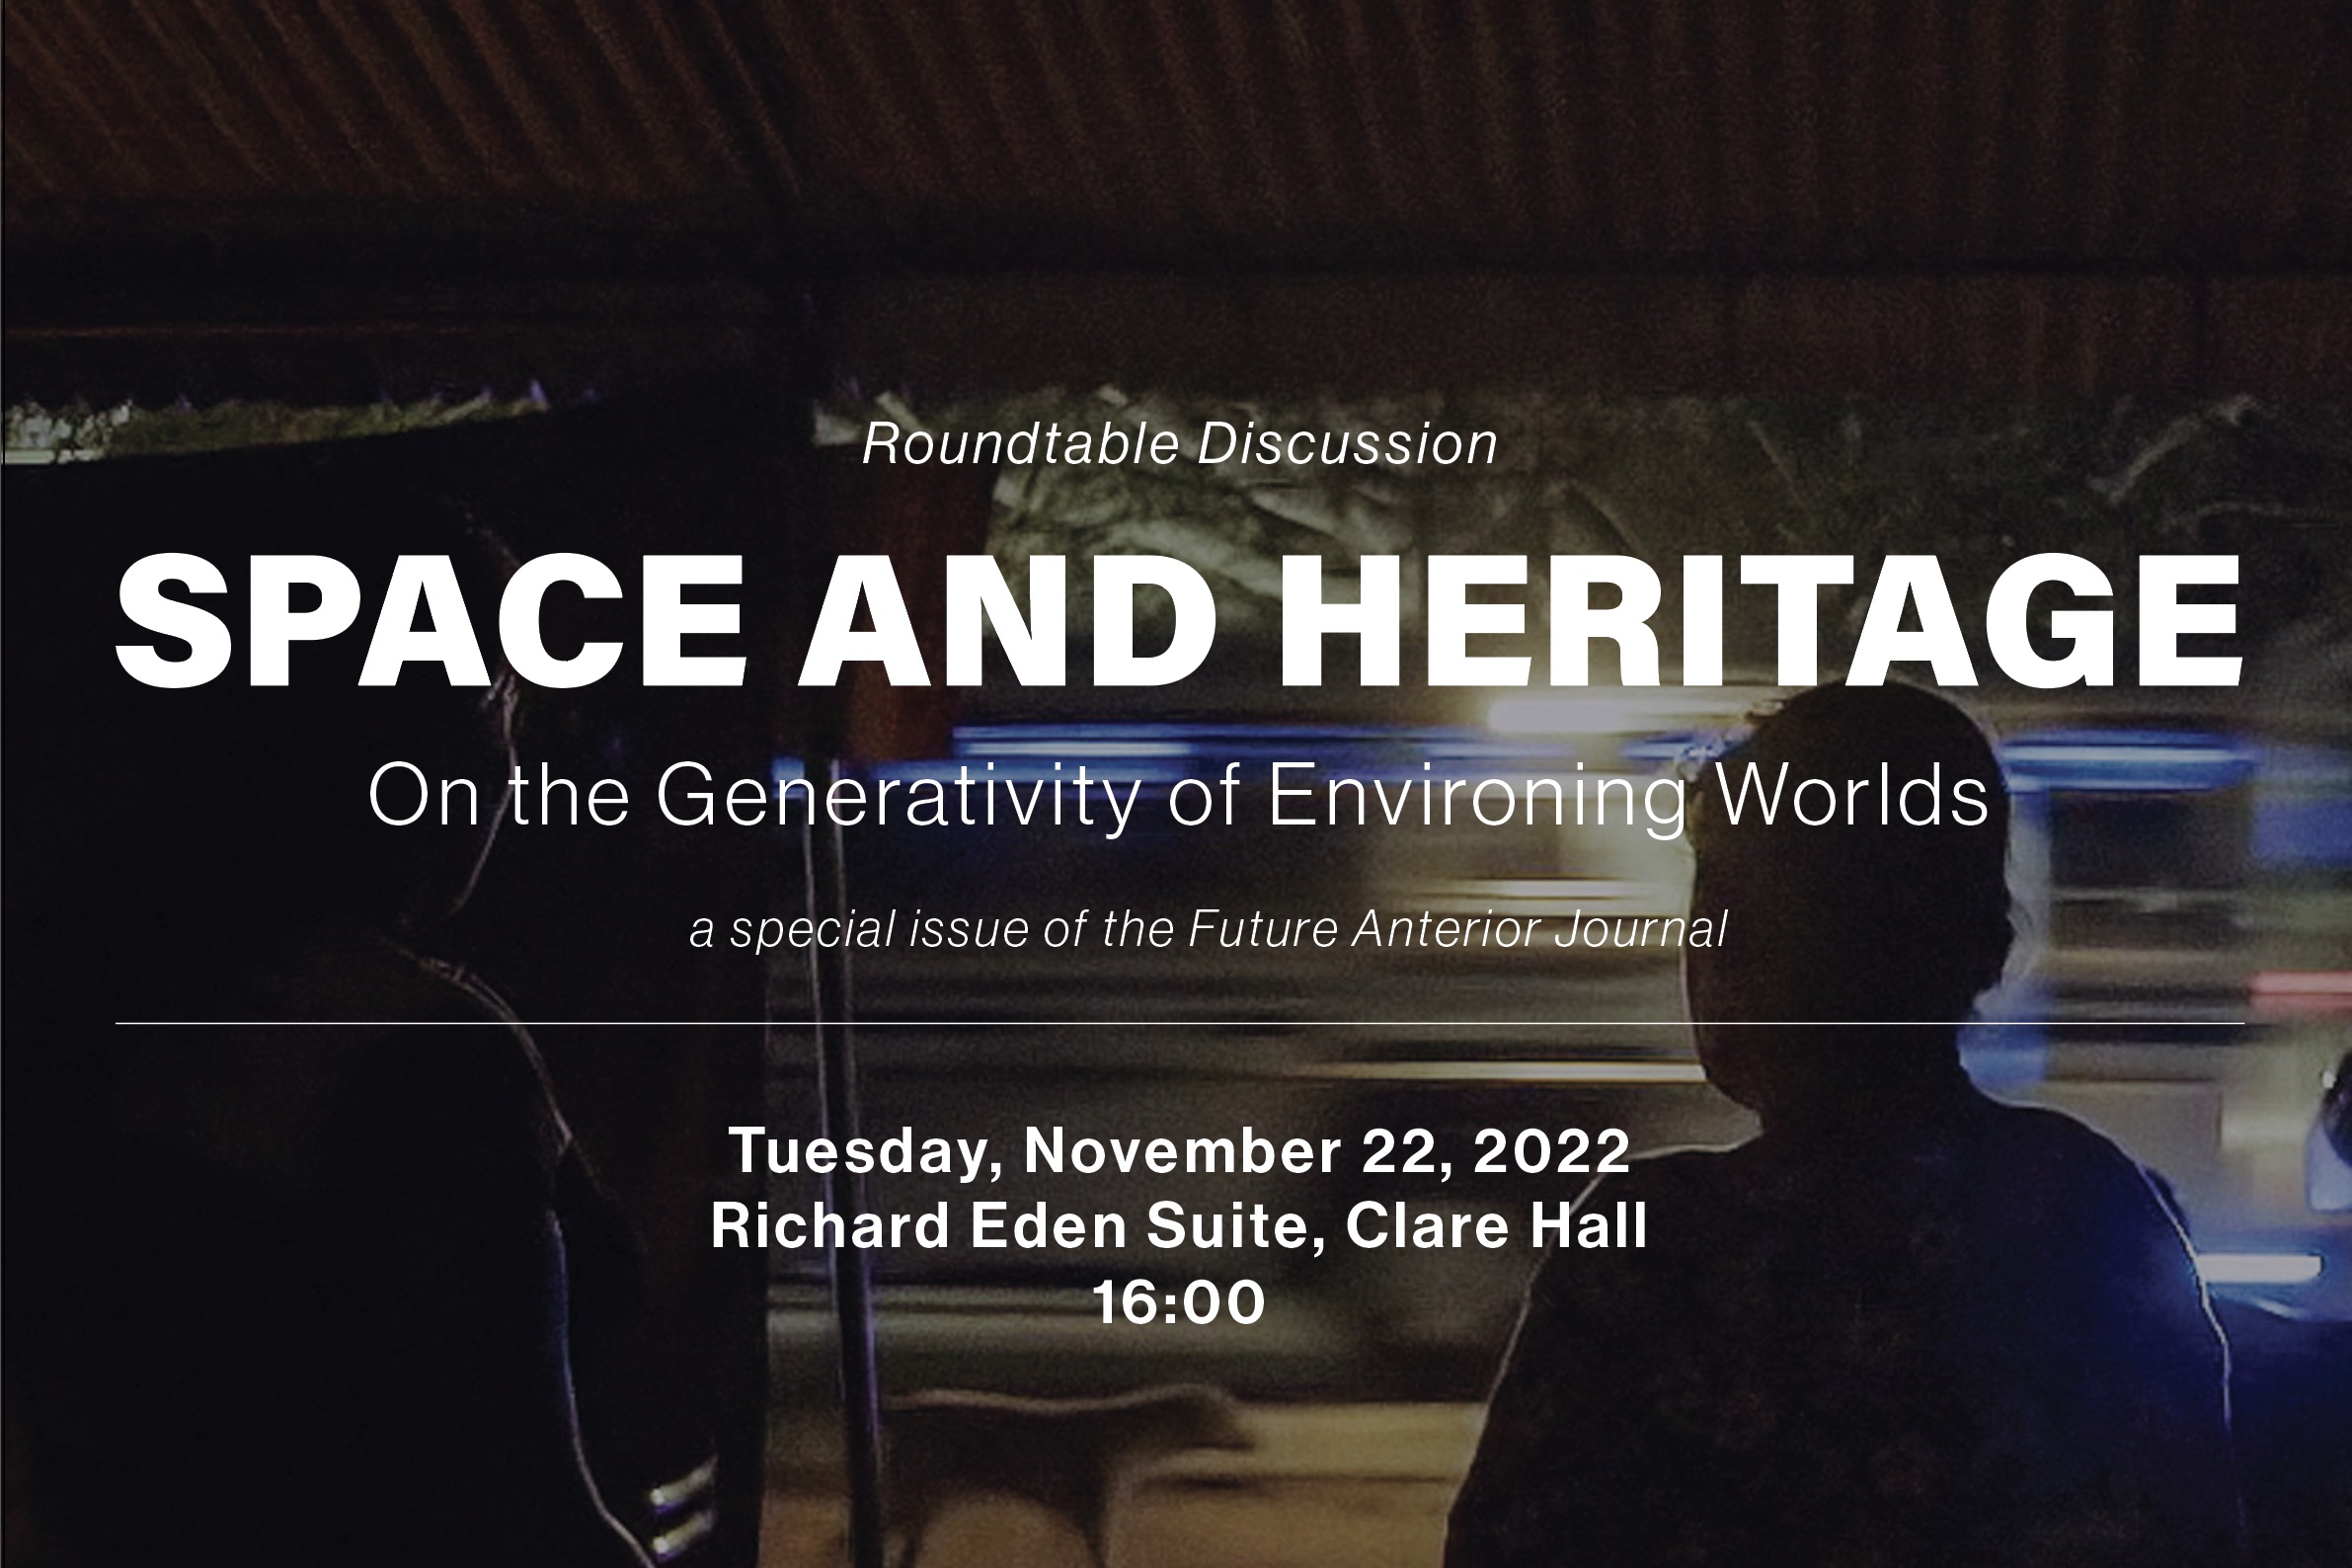 Space and Heritage: On the Generativity of Environing Worlds